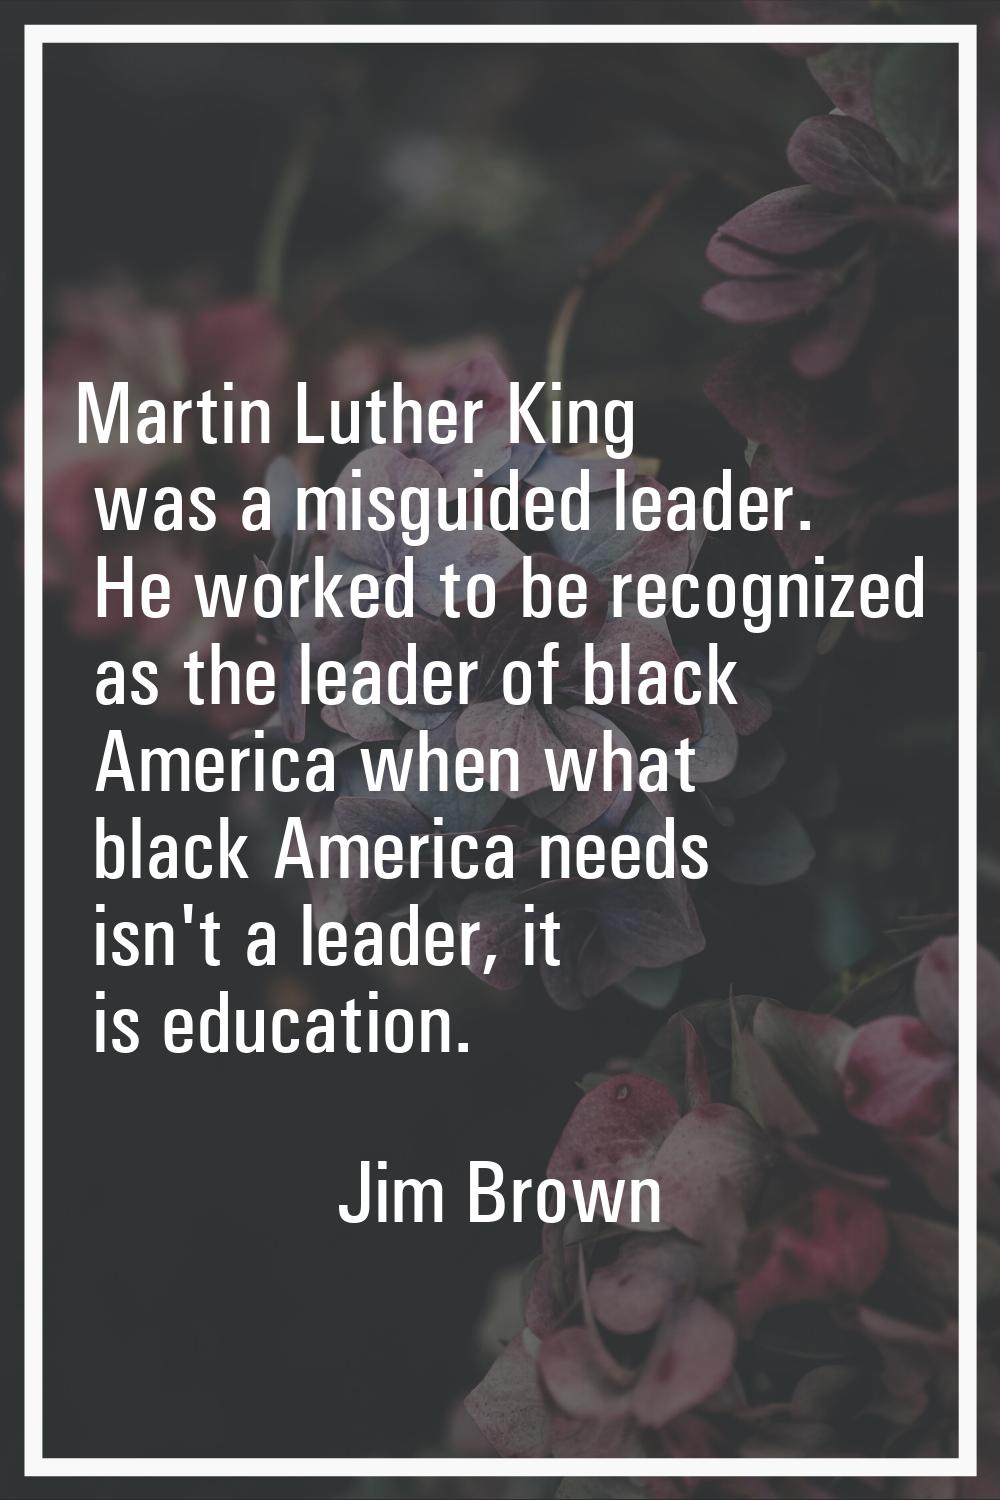 Martin Luther King was a misguided leader. He worked to be recognized as the leader of black Americ